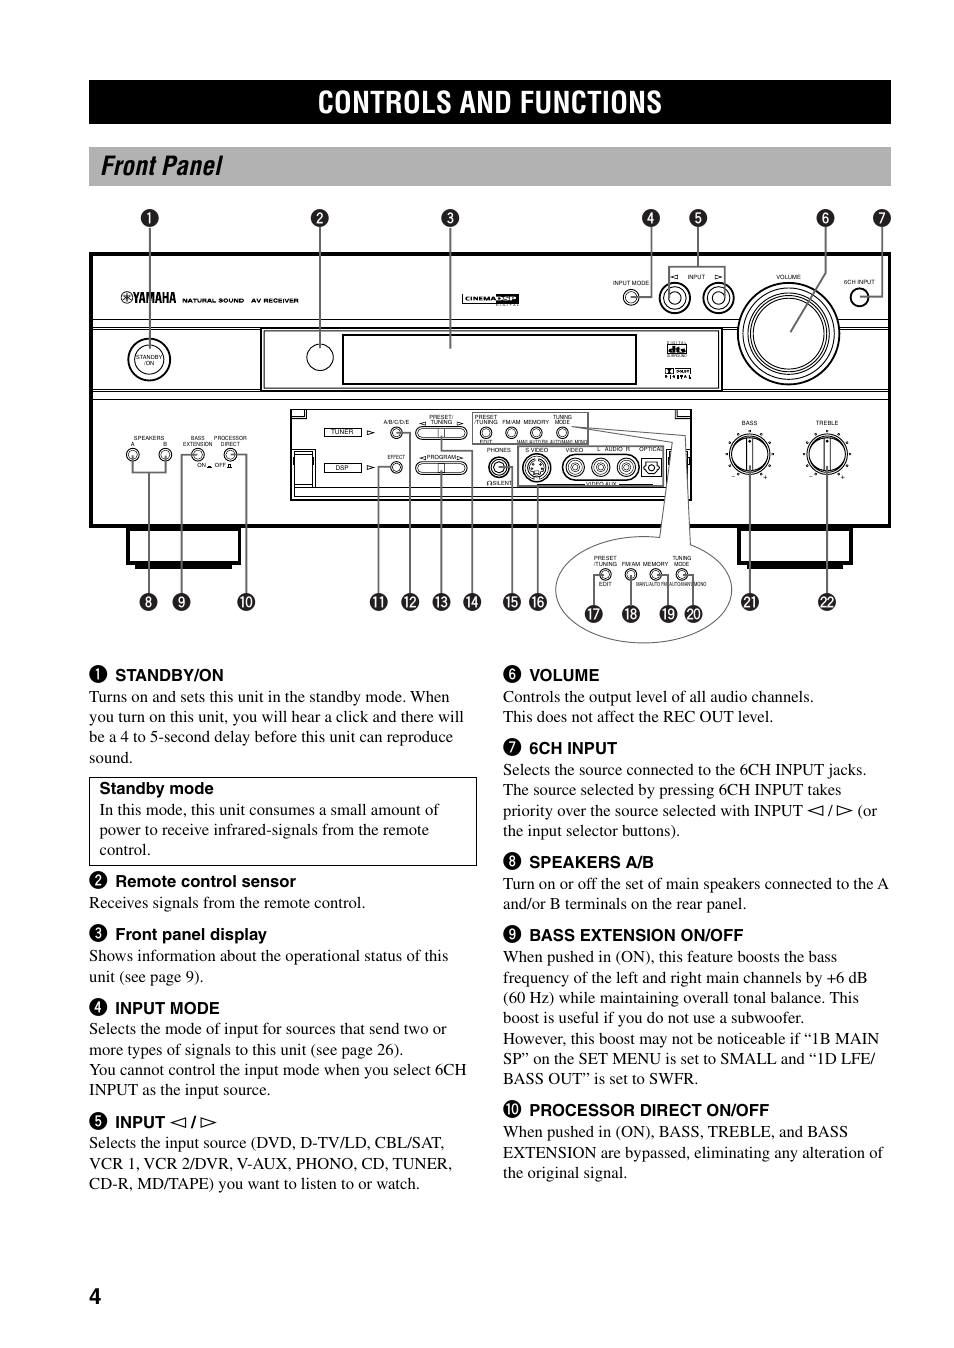 Controls and functions, Front panel, Io p u | Yamaha RX-V800 User